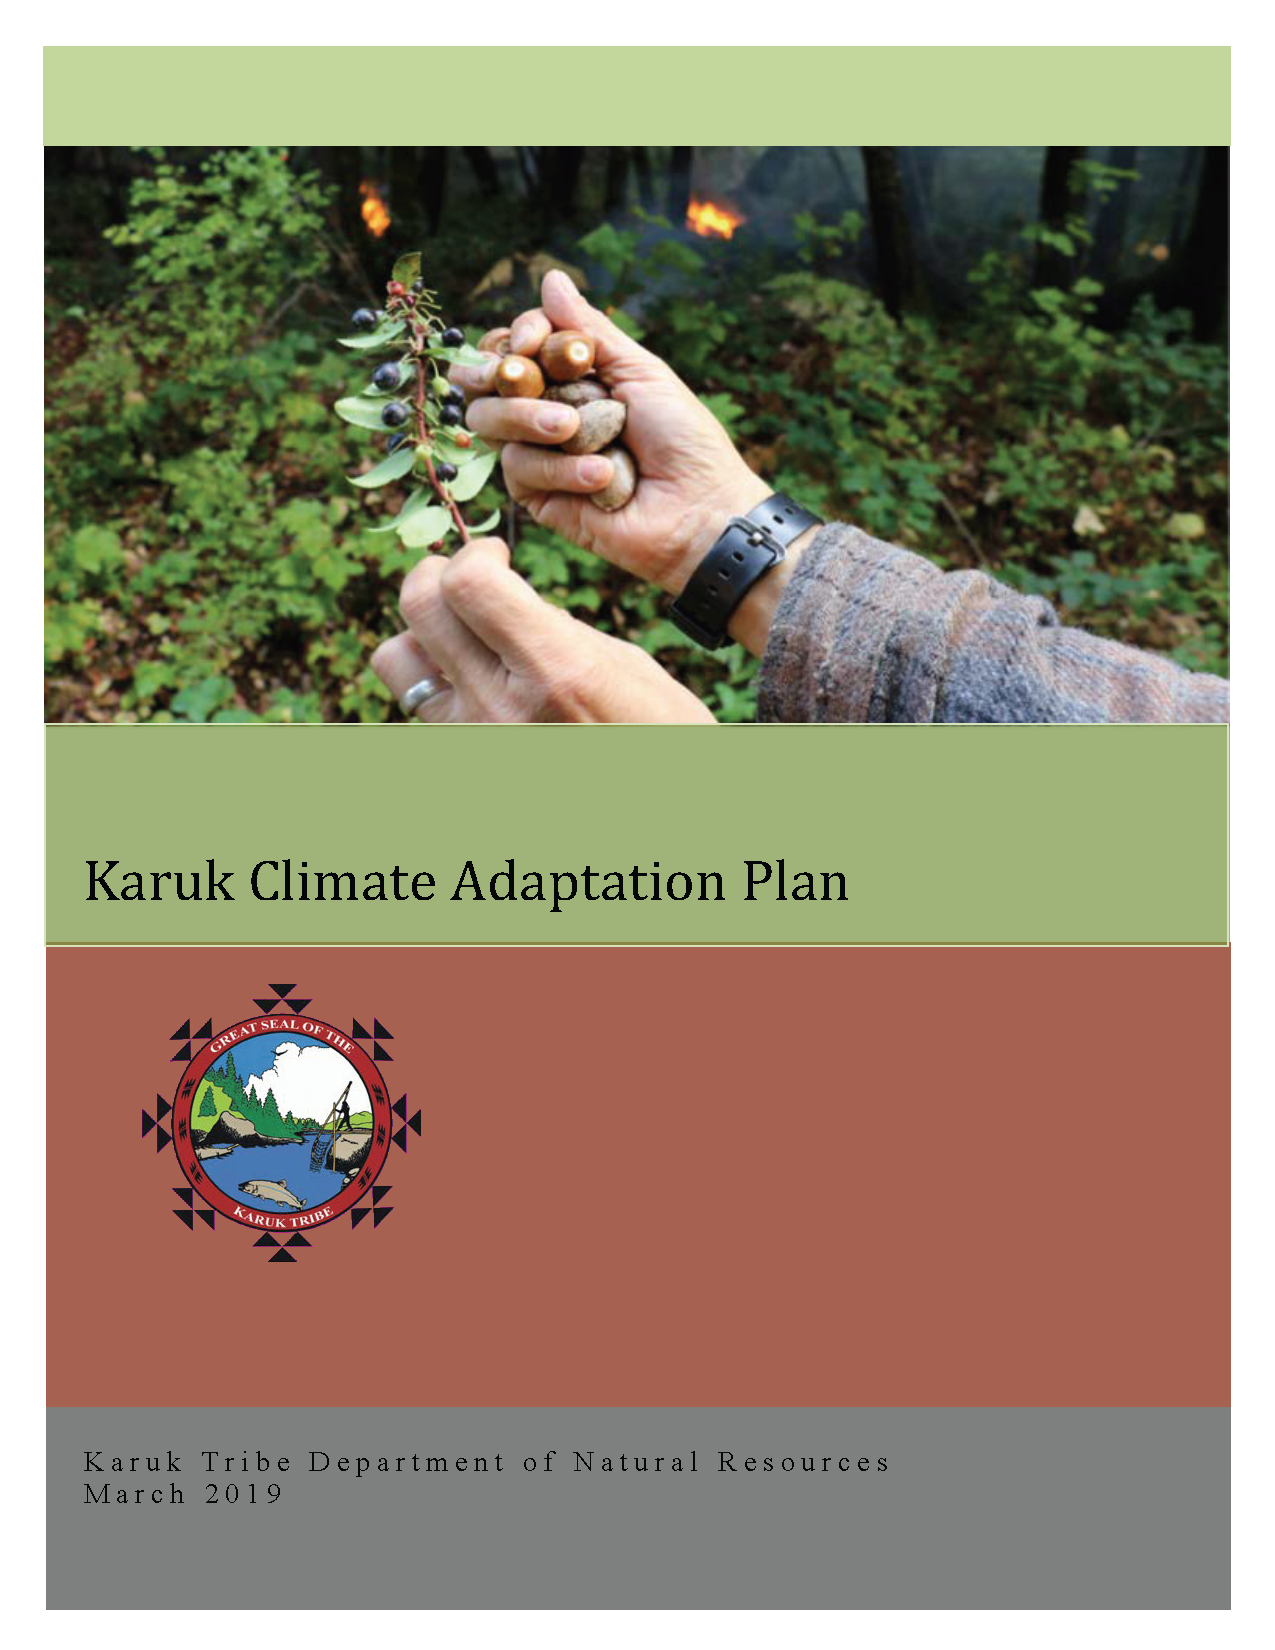 Pages from Karuk Climate Adaptation Plan